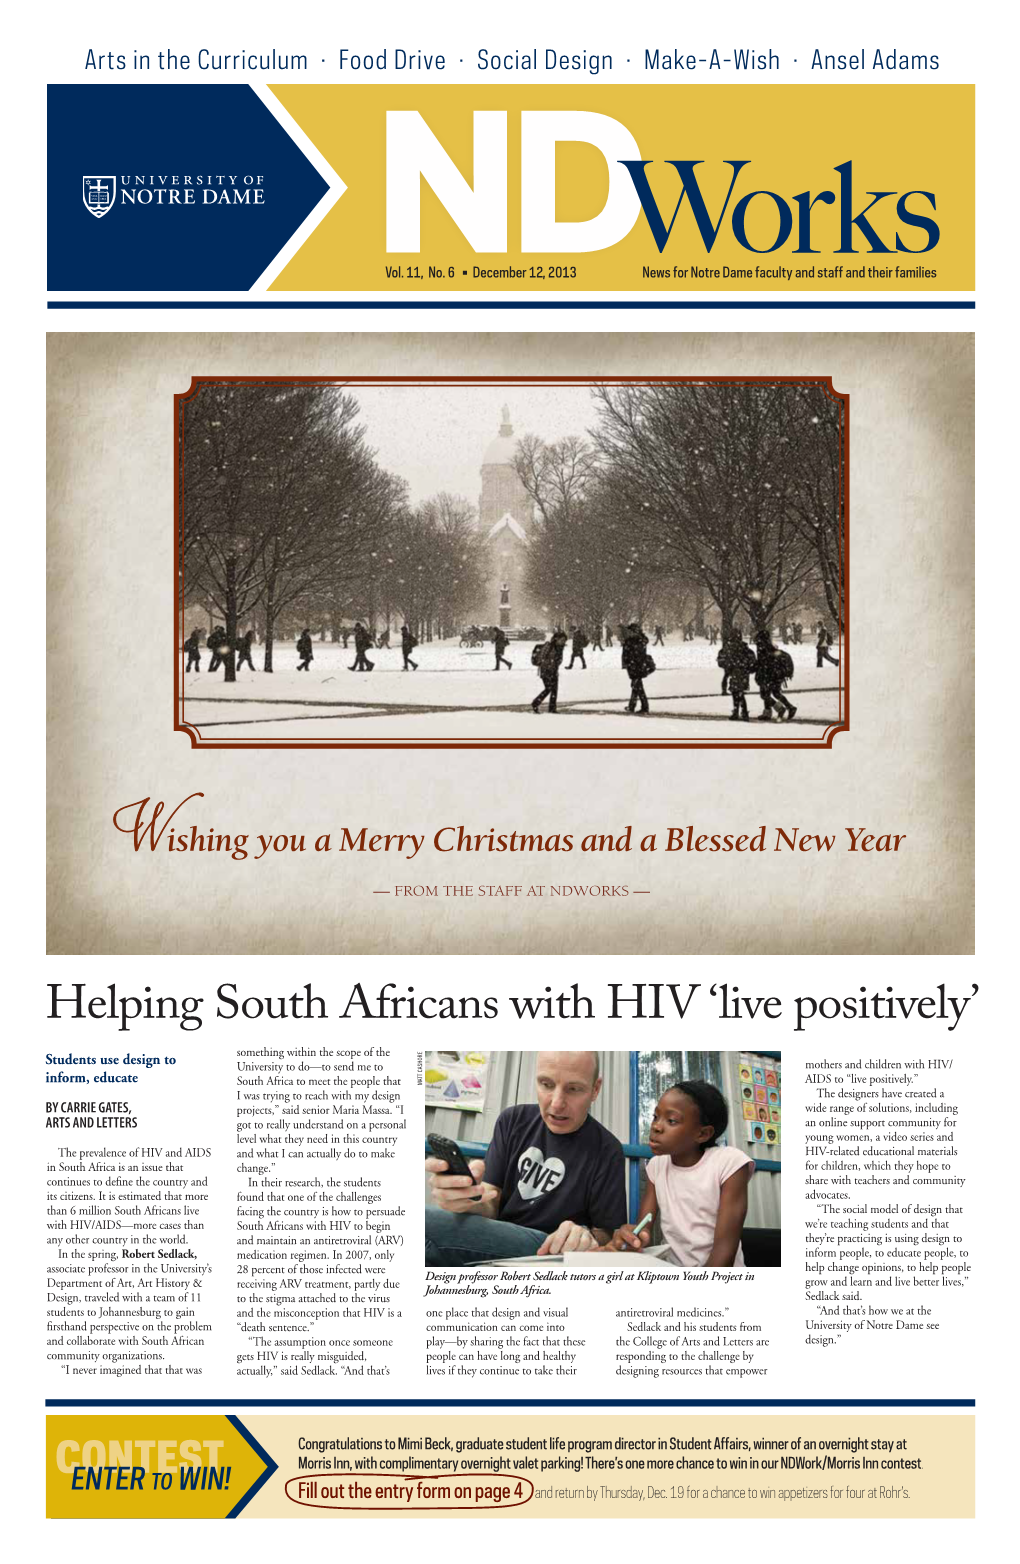 Helping South Africans with HIV 'Live Positively'